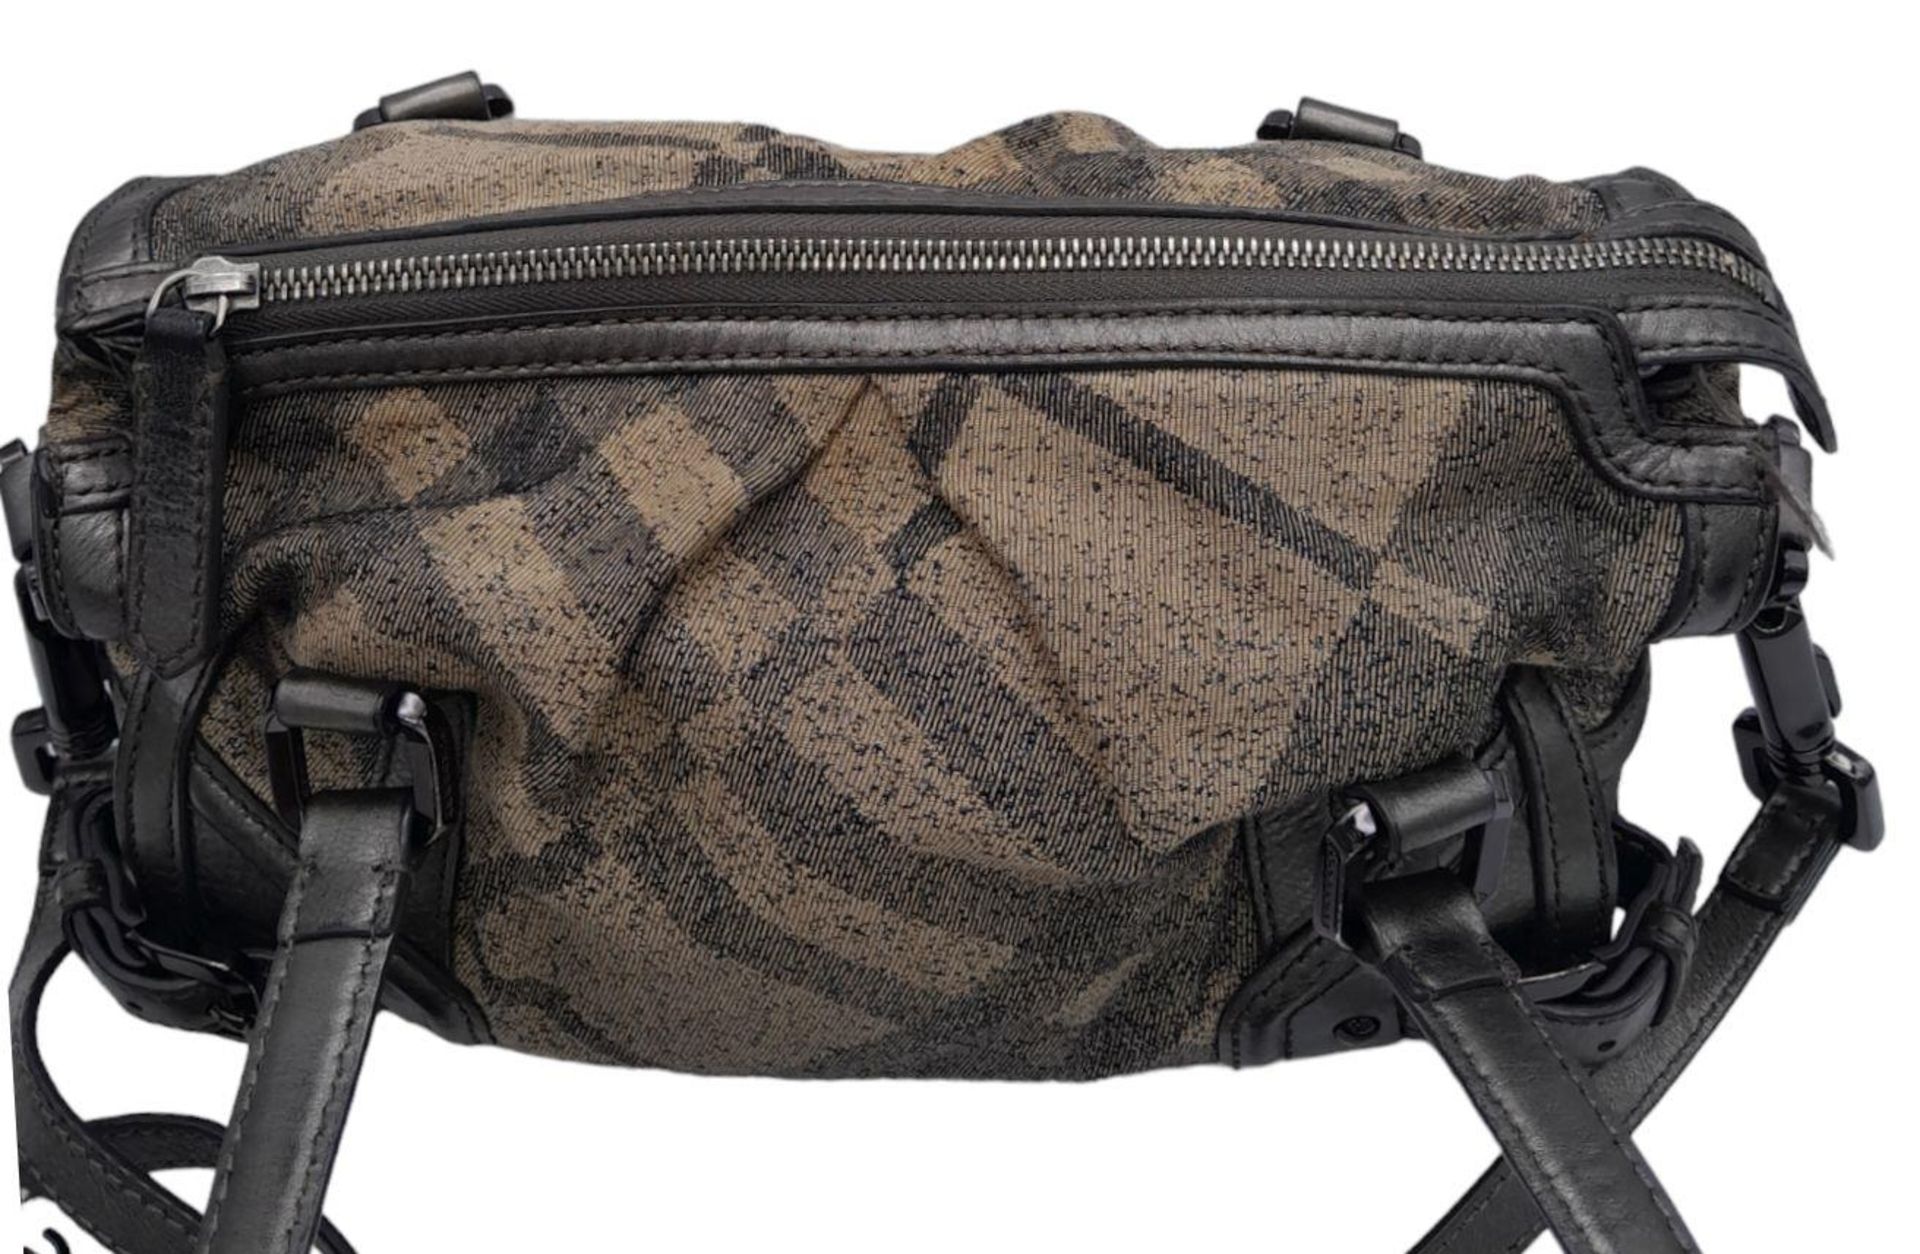 A Burberry Metallic Grey Smoke Check Bag. Canvas exterior with leather trim, leather straps, black- - Image 5 of 9